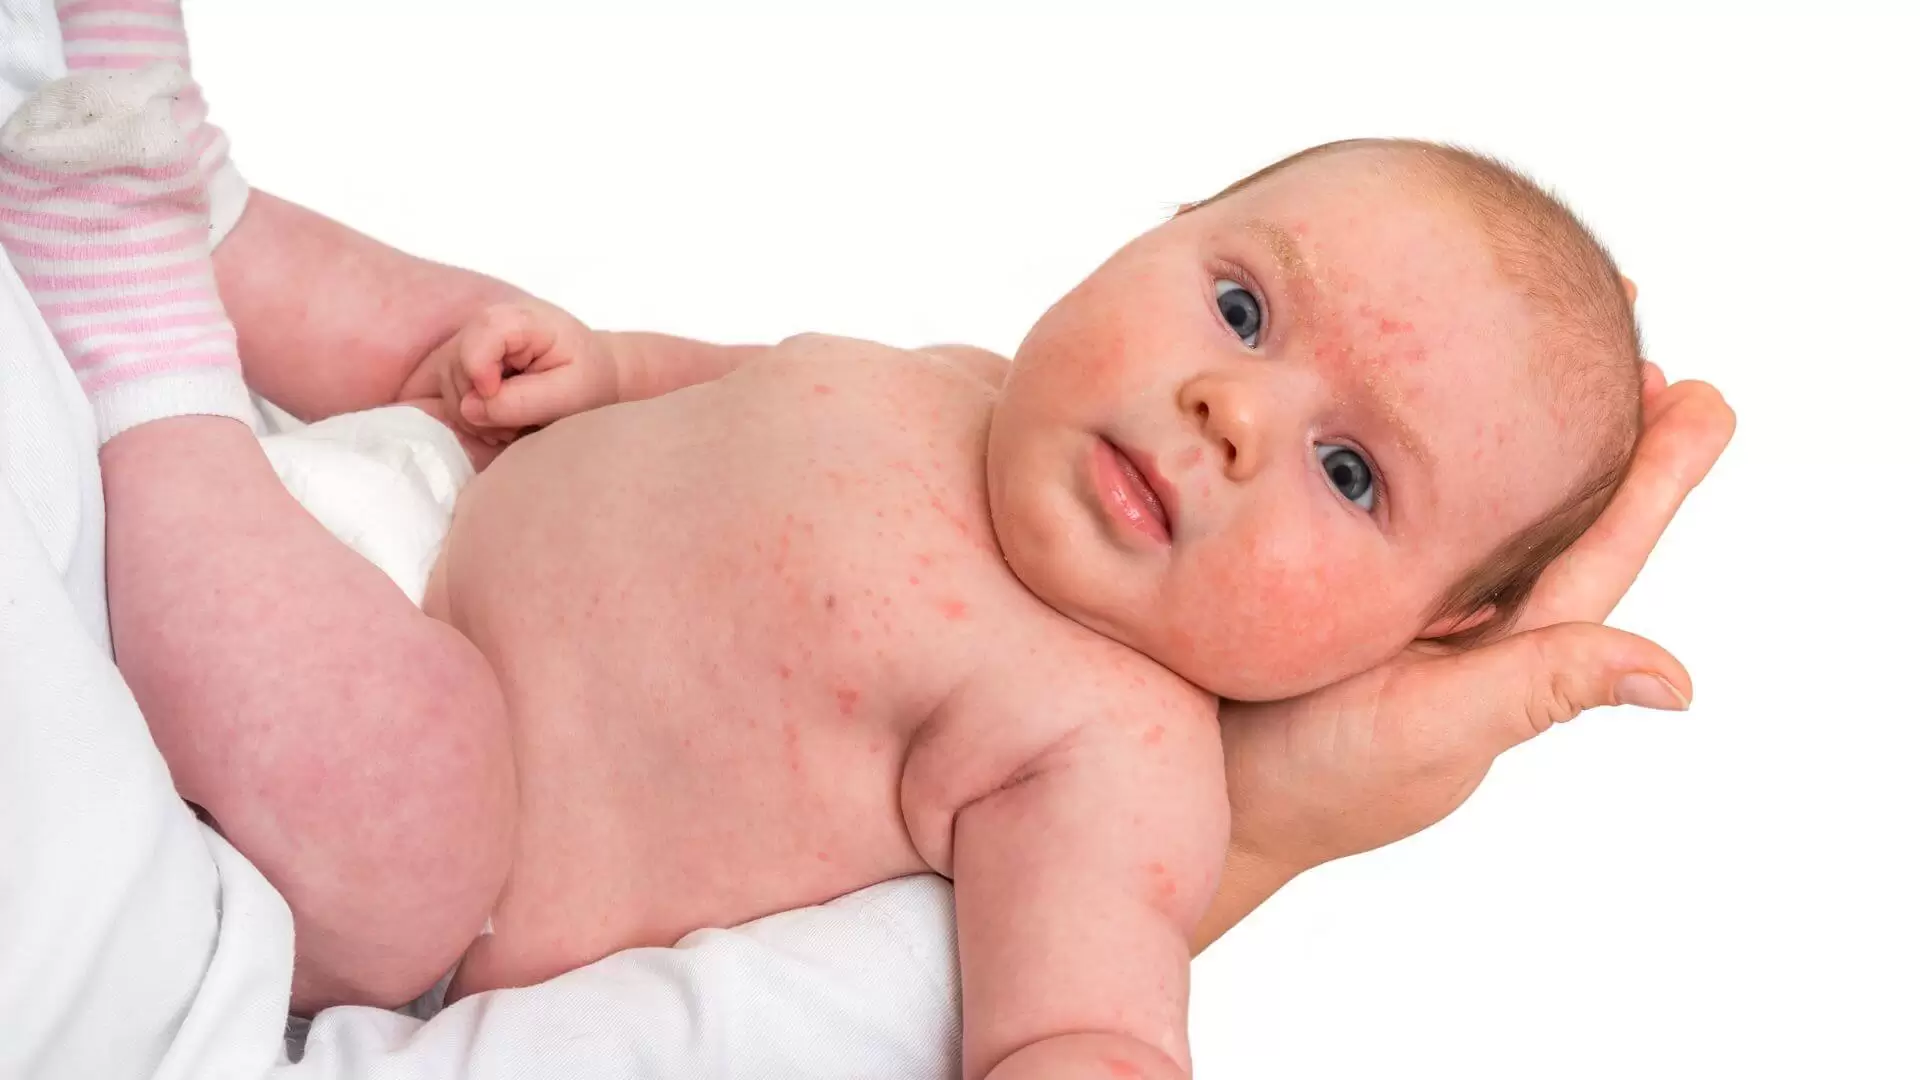 Does Your Baby Have Pimples And You Don’t Know How To Take Care of His Skin (1)